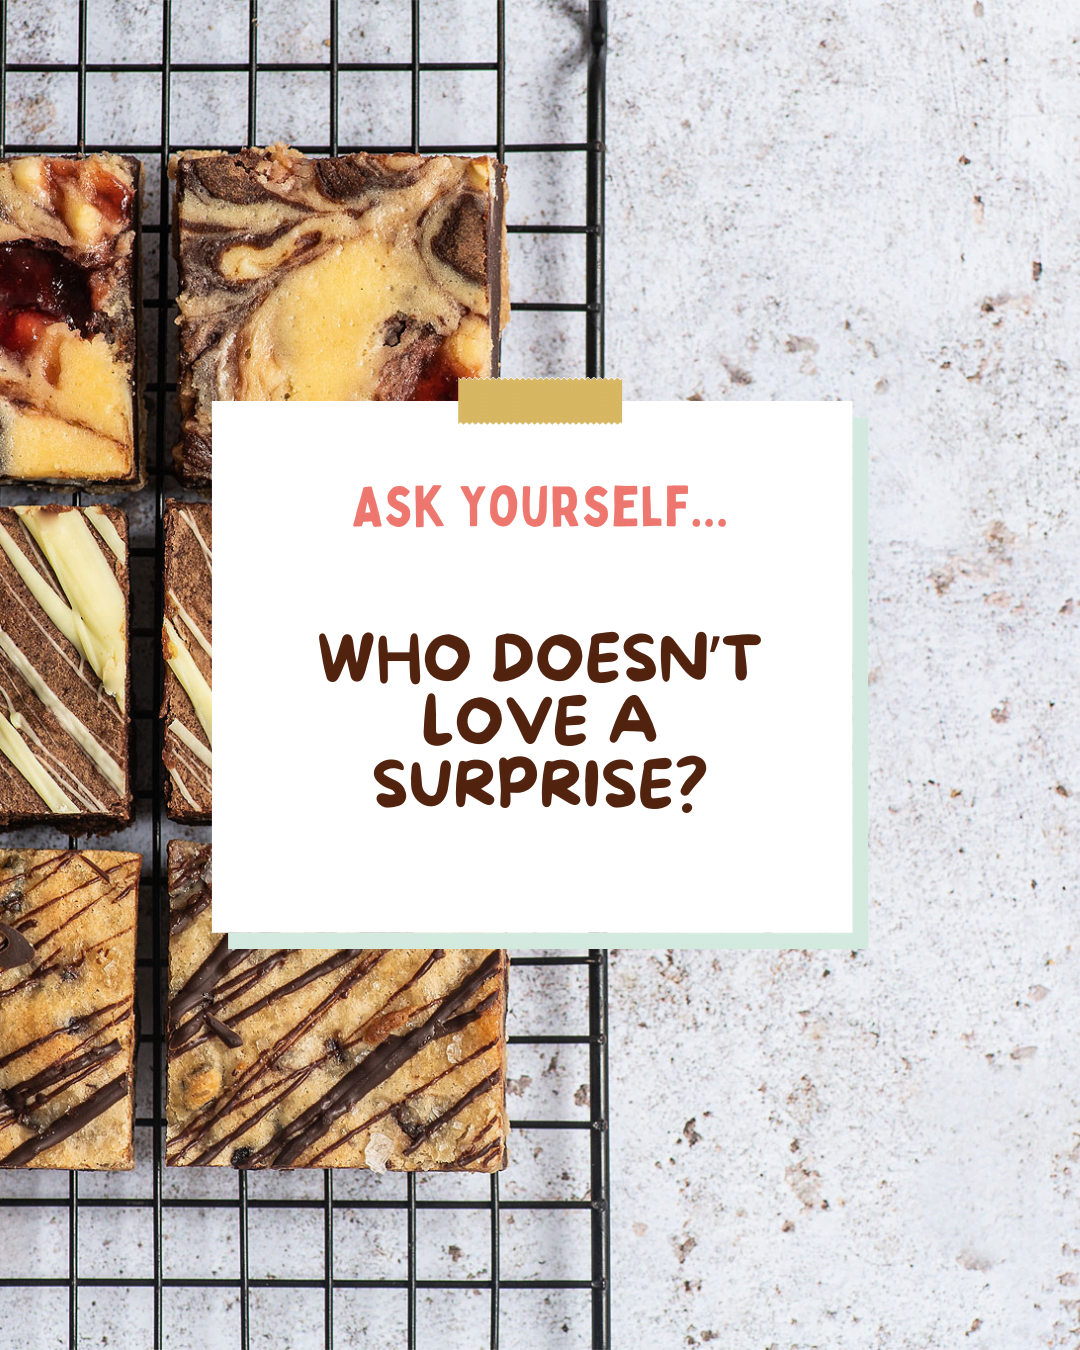 There are 6 chocolate brownies and blondies on a baking grid. This is sitting on a pale marbled background. In the fore vision is a graphic in a note pad style read "ASK YOURSELF" in pink capital letters and "WHO DOESN'T LOVE A SURPRISE?" in brown capital letters.